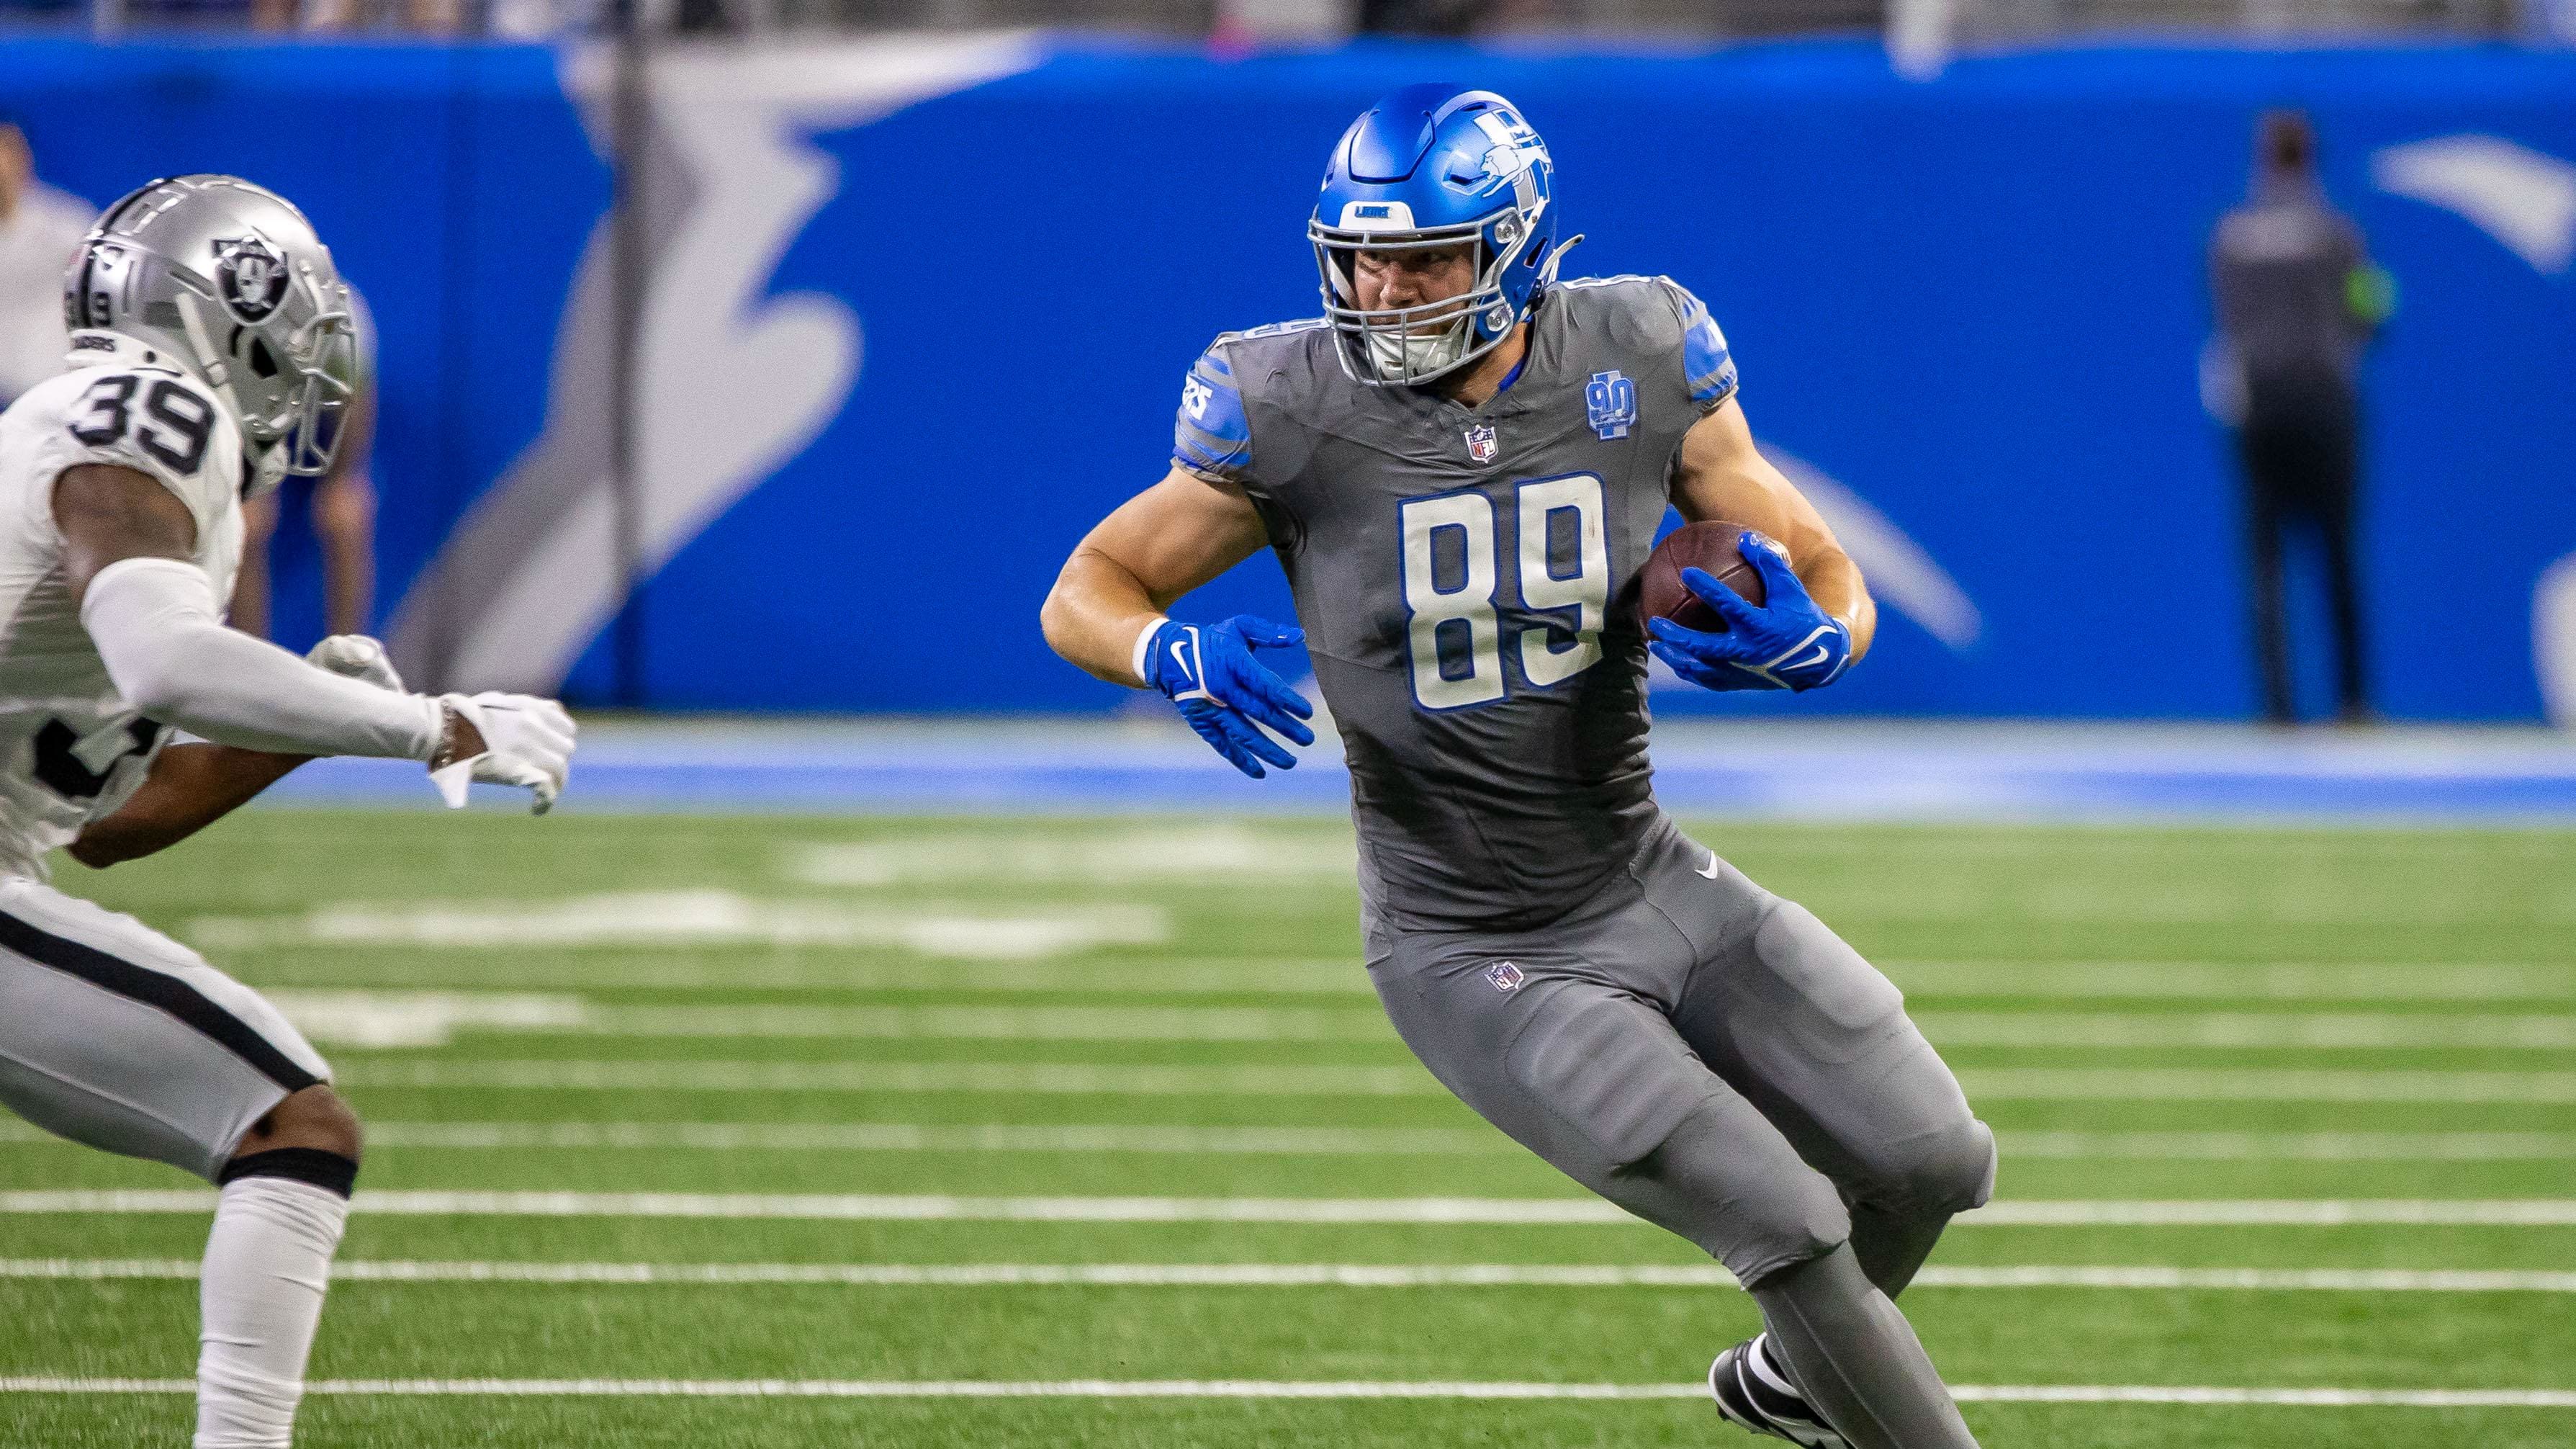 Detroit Lions tight end Brock Wright (89) runs with the ball.